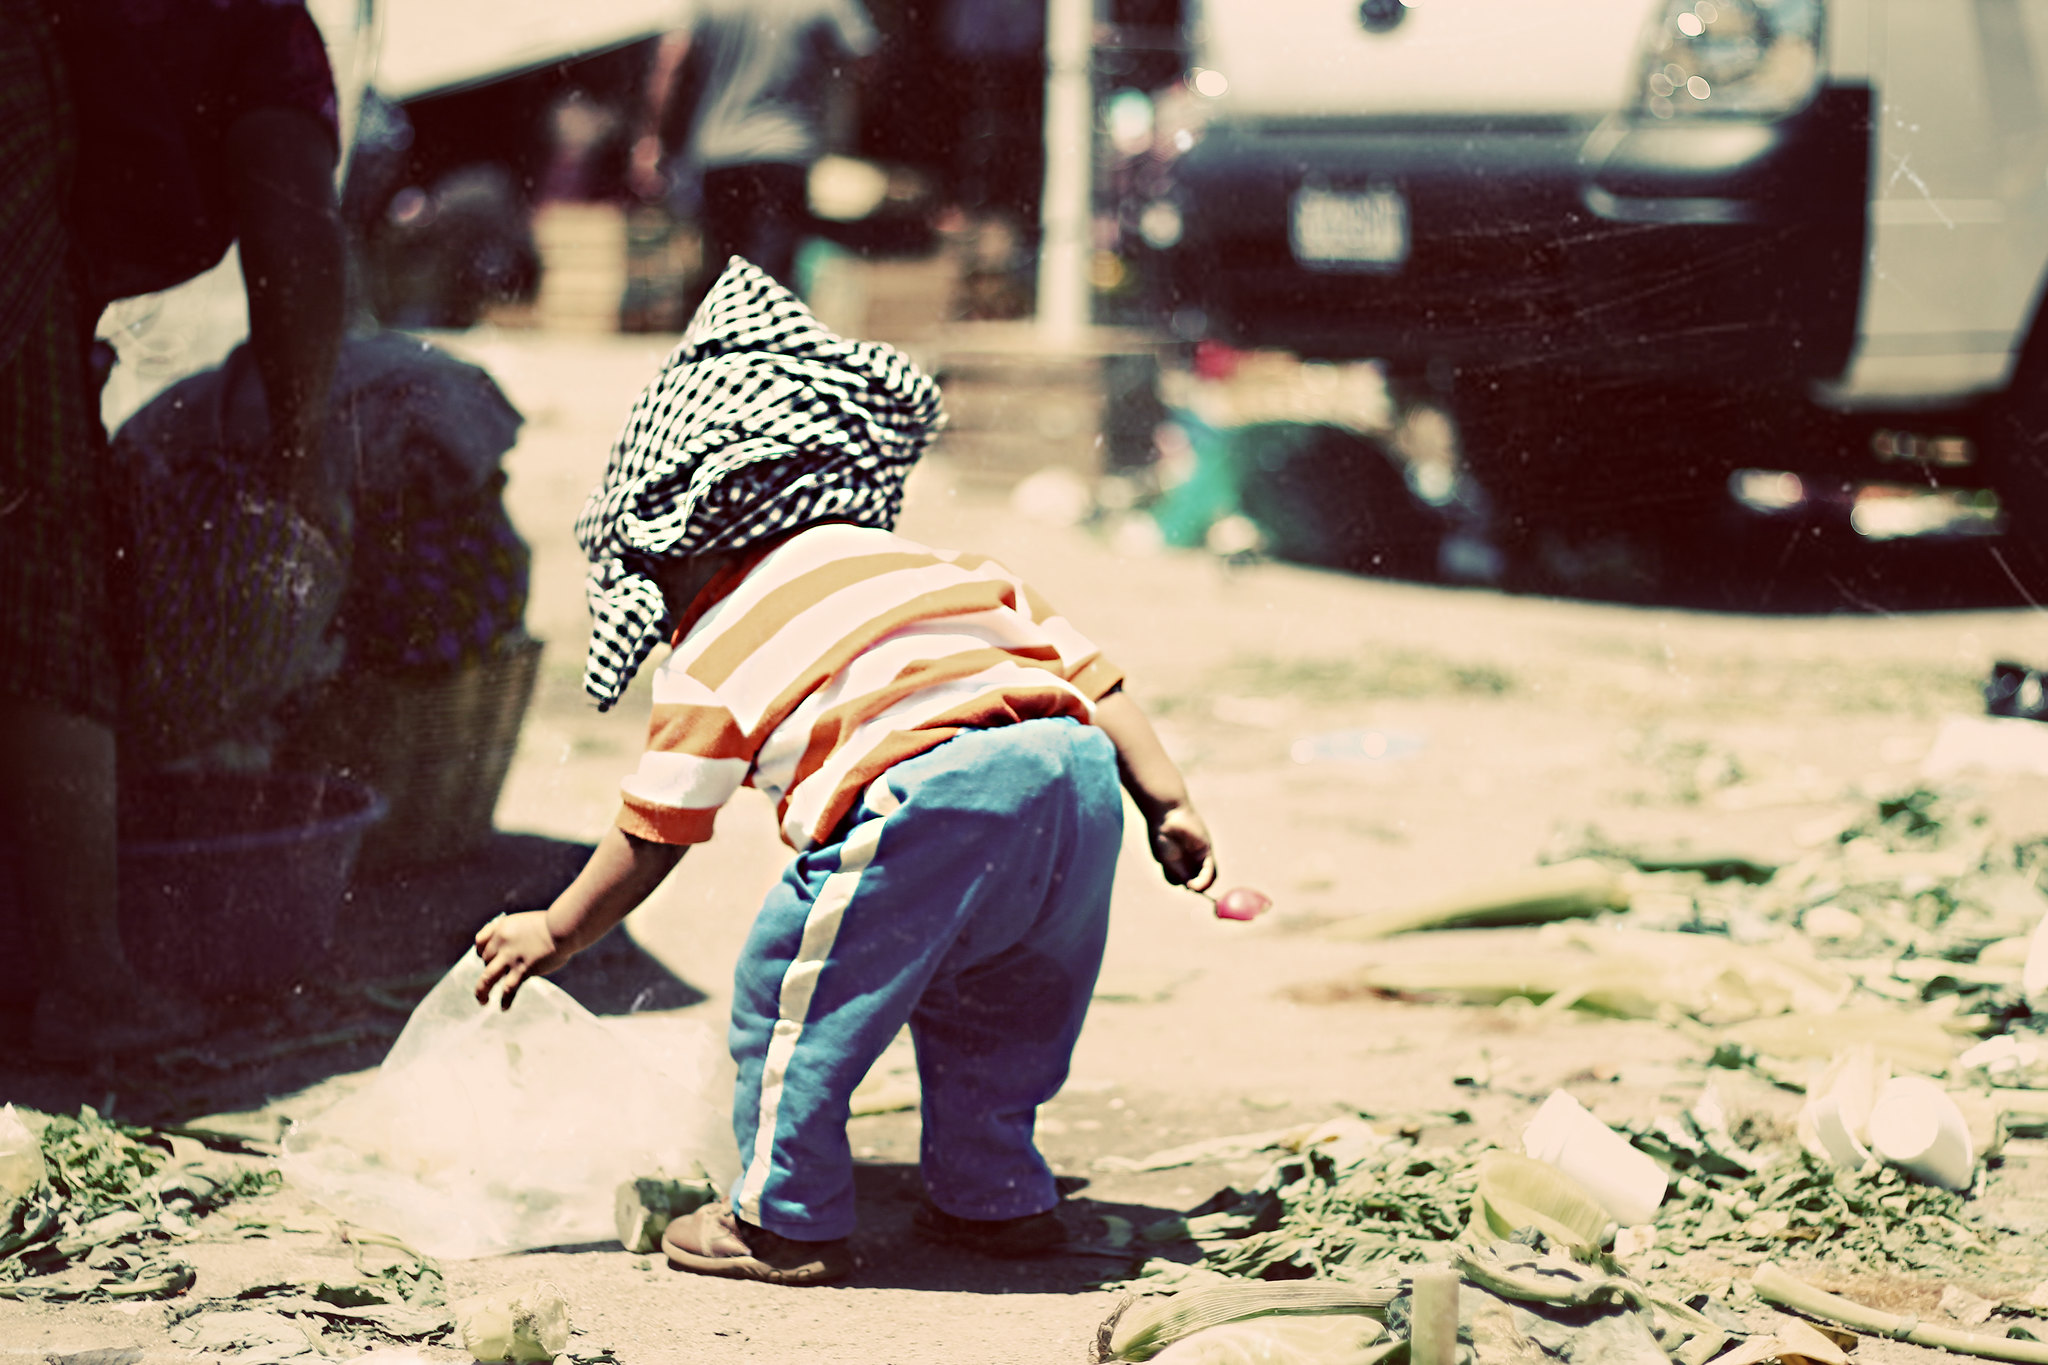 A small child with cloth wrapped around their head plays with debris in the street.